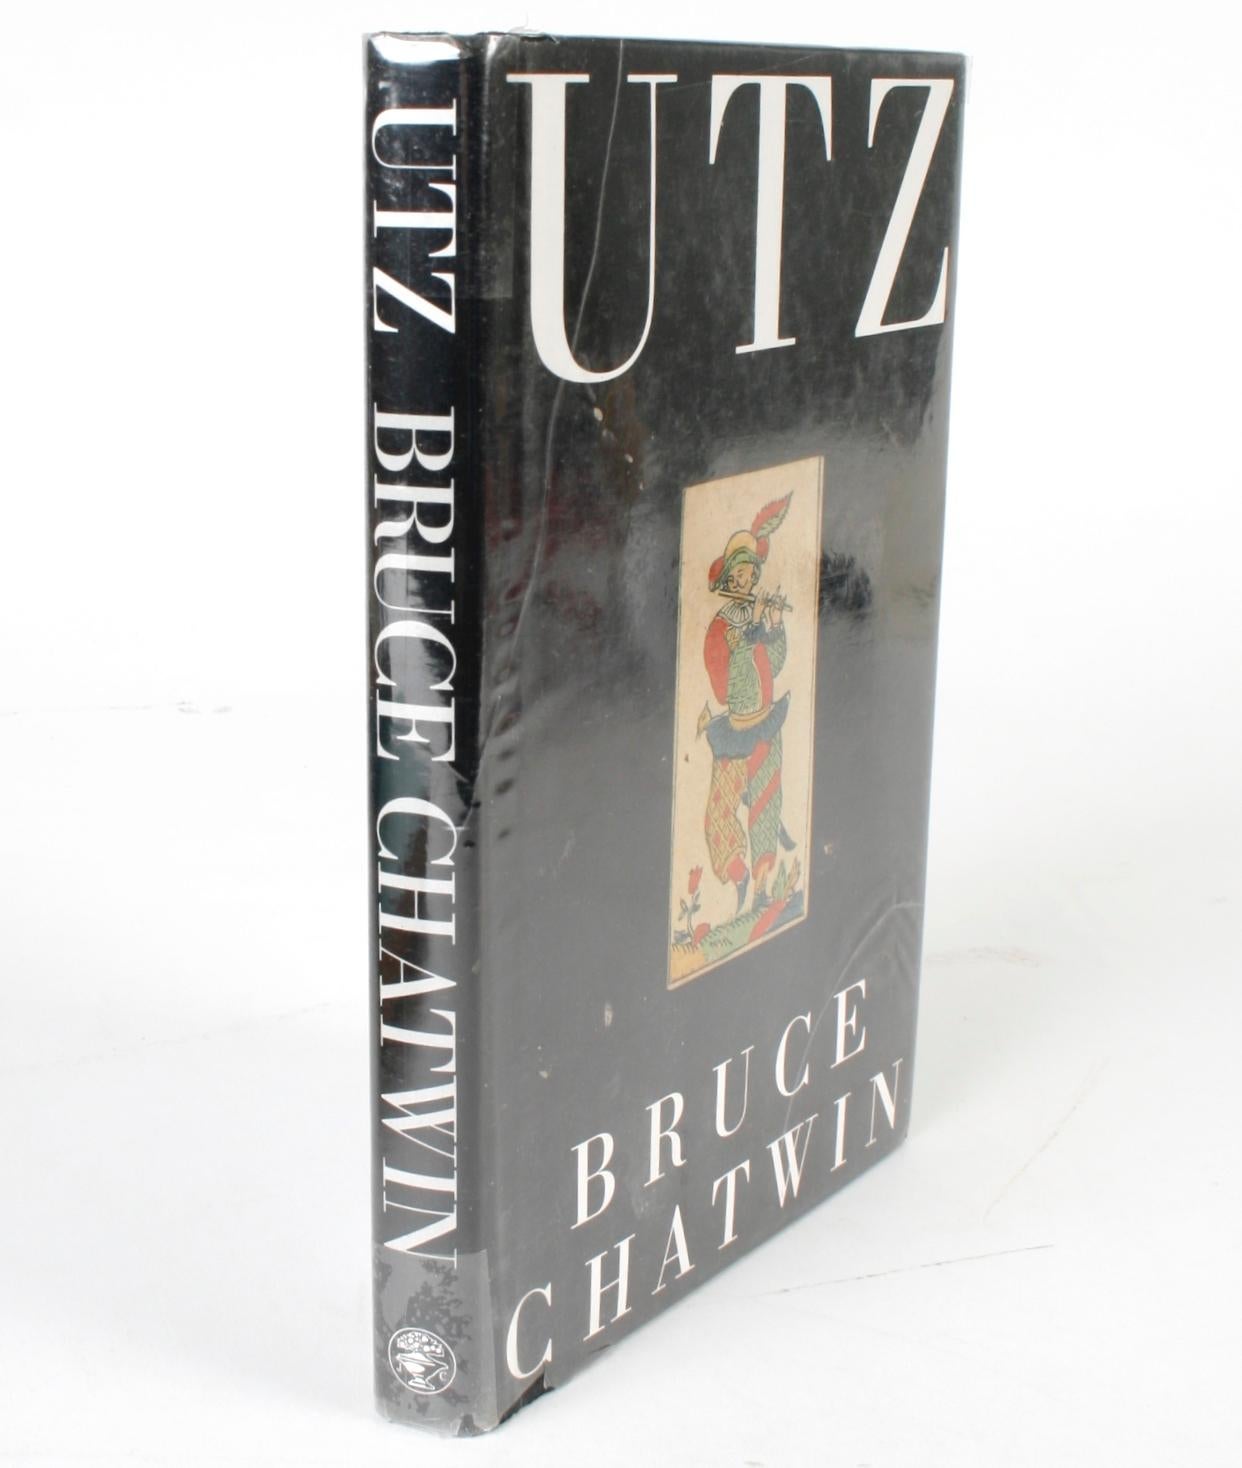 Utz by Bruce Chatwin. Jonathan Cape Ltd, London, 1988. First edition hardcover with dust jacket. The novel follows the fortunes of Kaspar Utz who lives in Czechoslovakia during the Cold War. Utz is a collector of Meissen porcelain and finds a way to